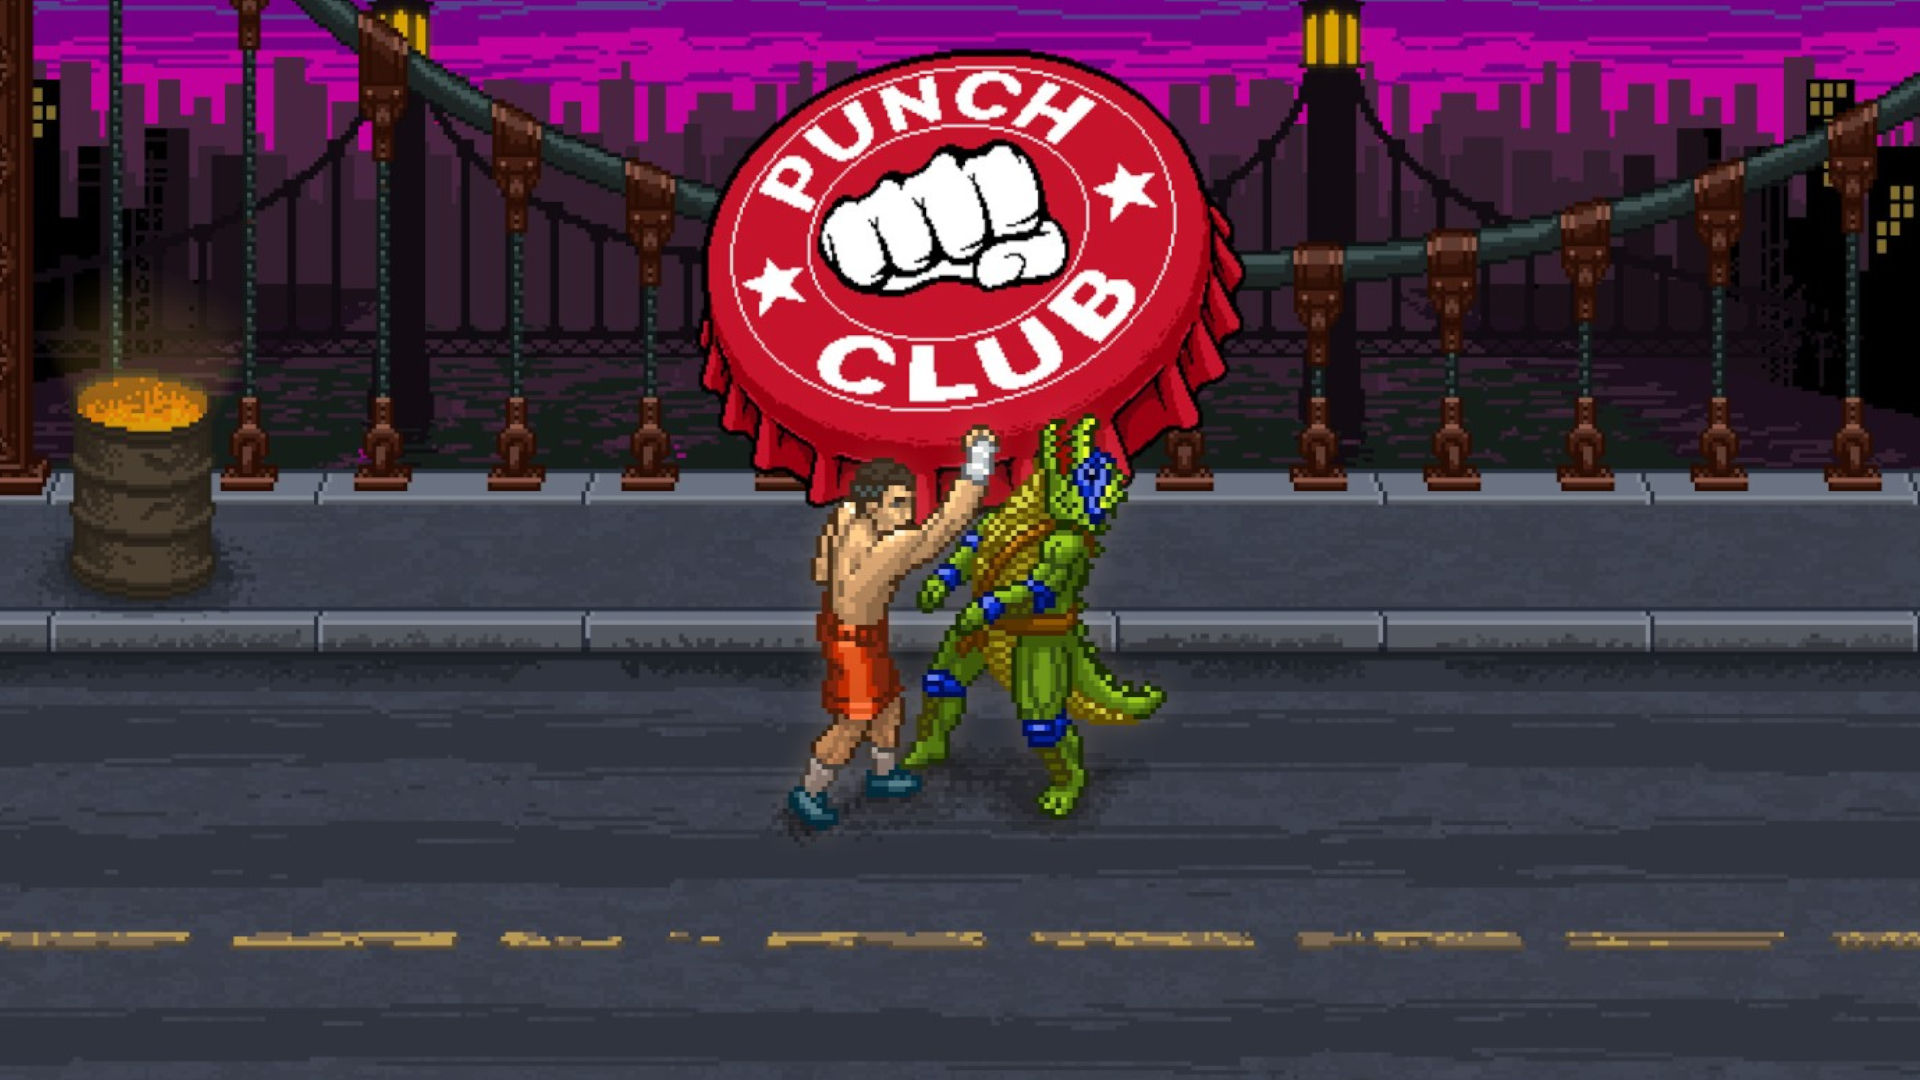 Punch Club cover art with boxing alligator